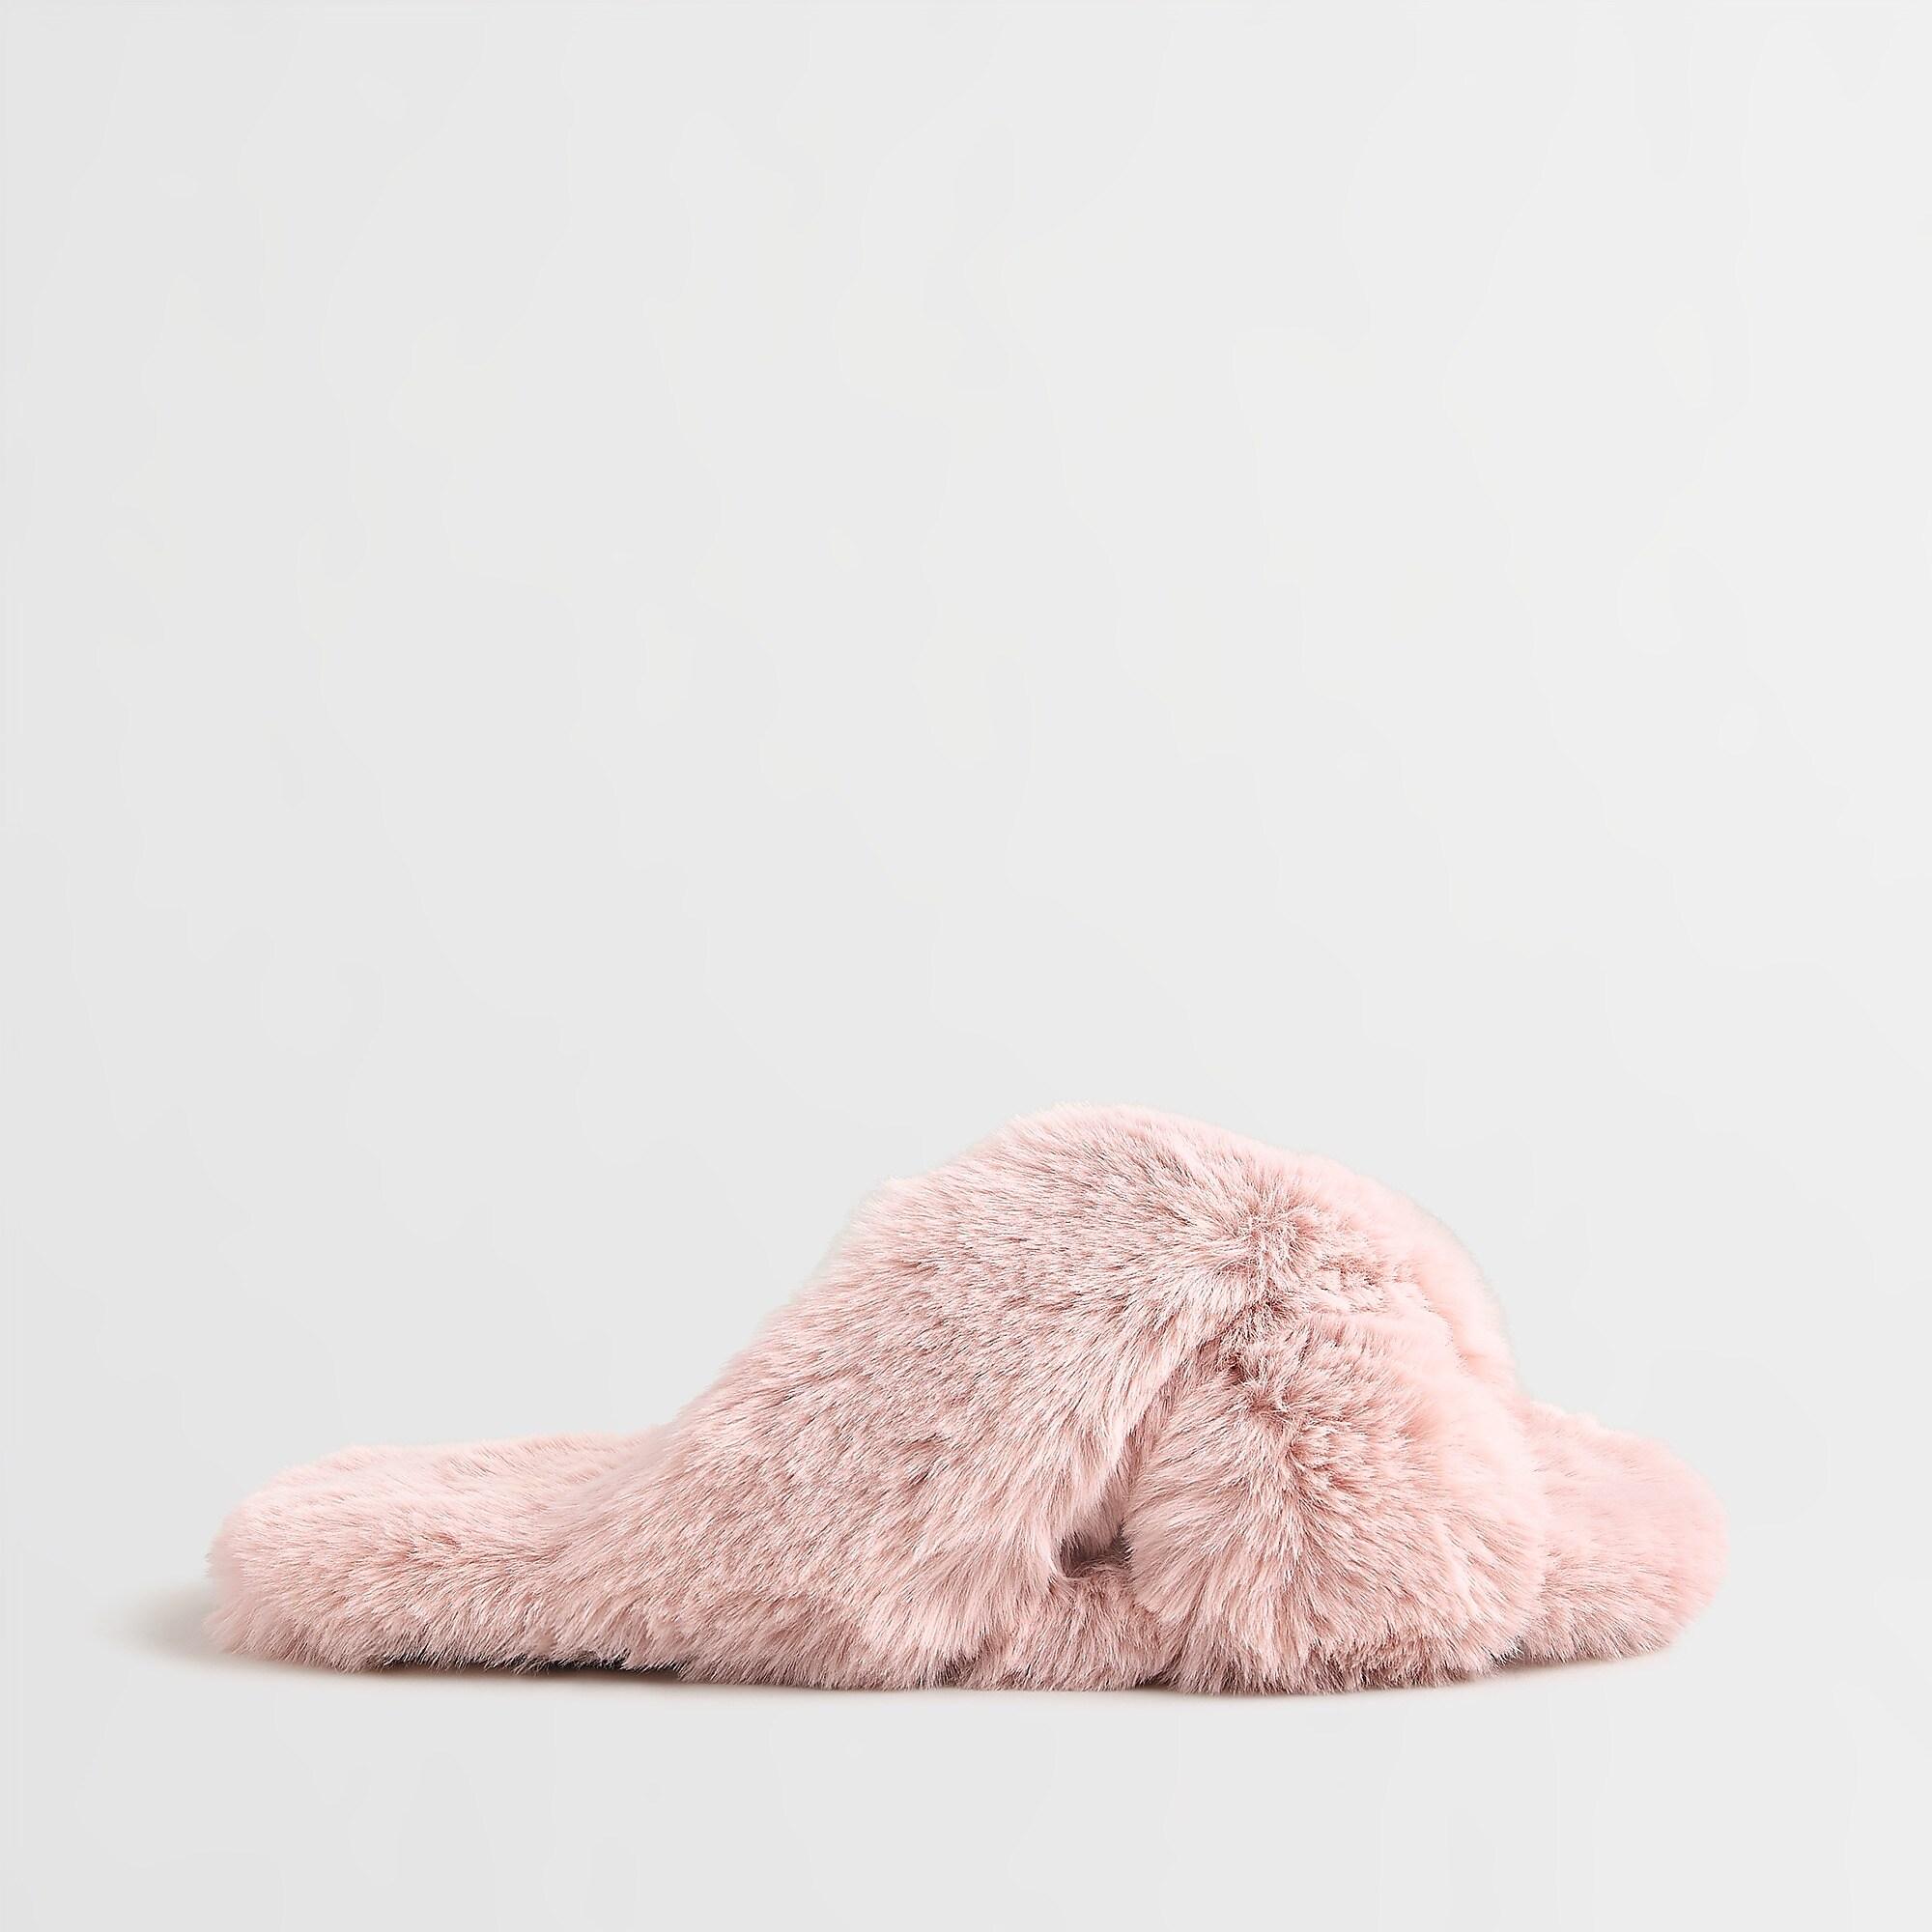 J.Crew Fuzzy Criss-cross Slippers in Soft Rose (Pink) - Lyst